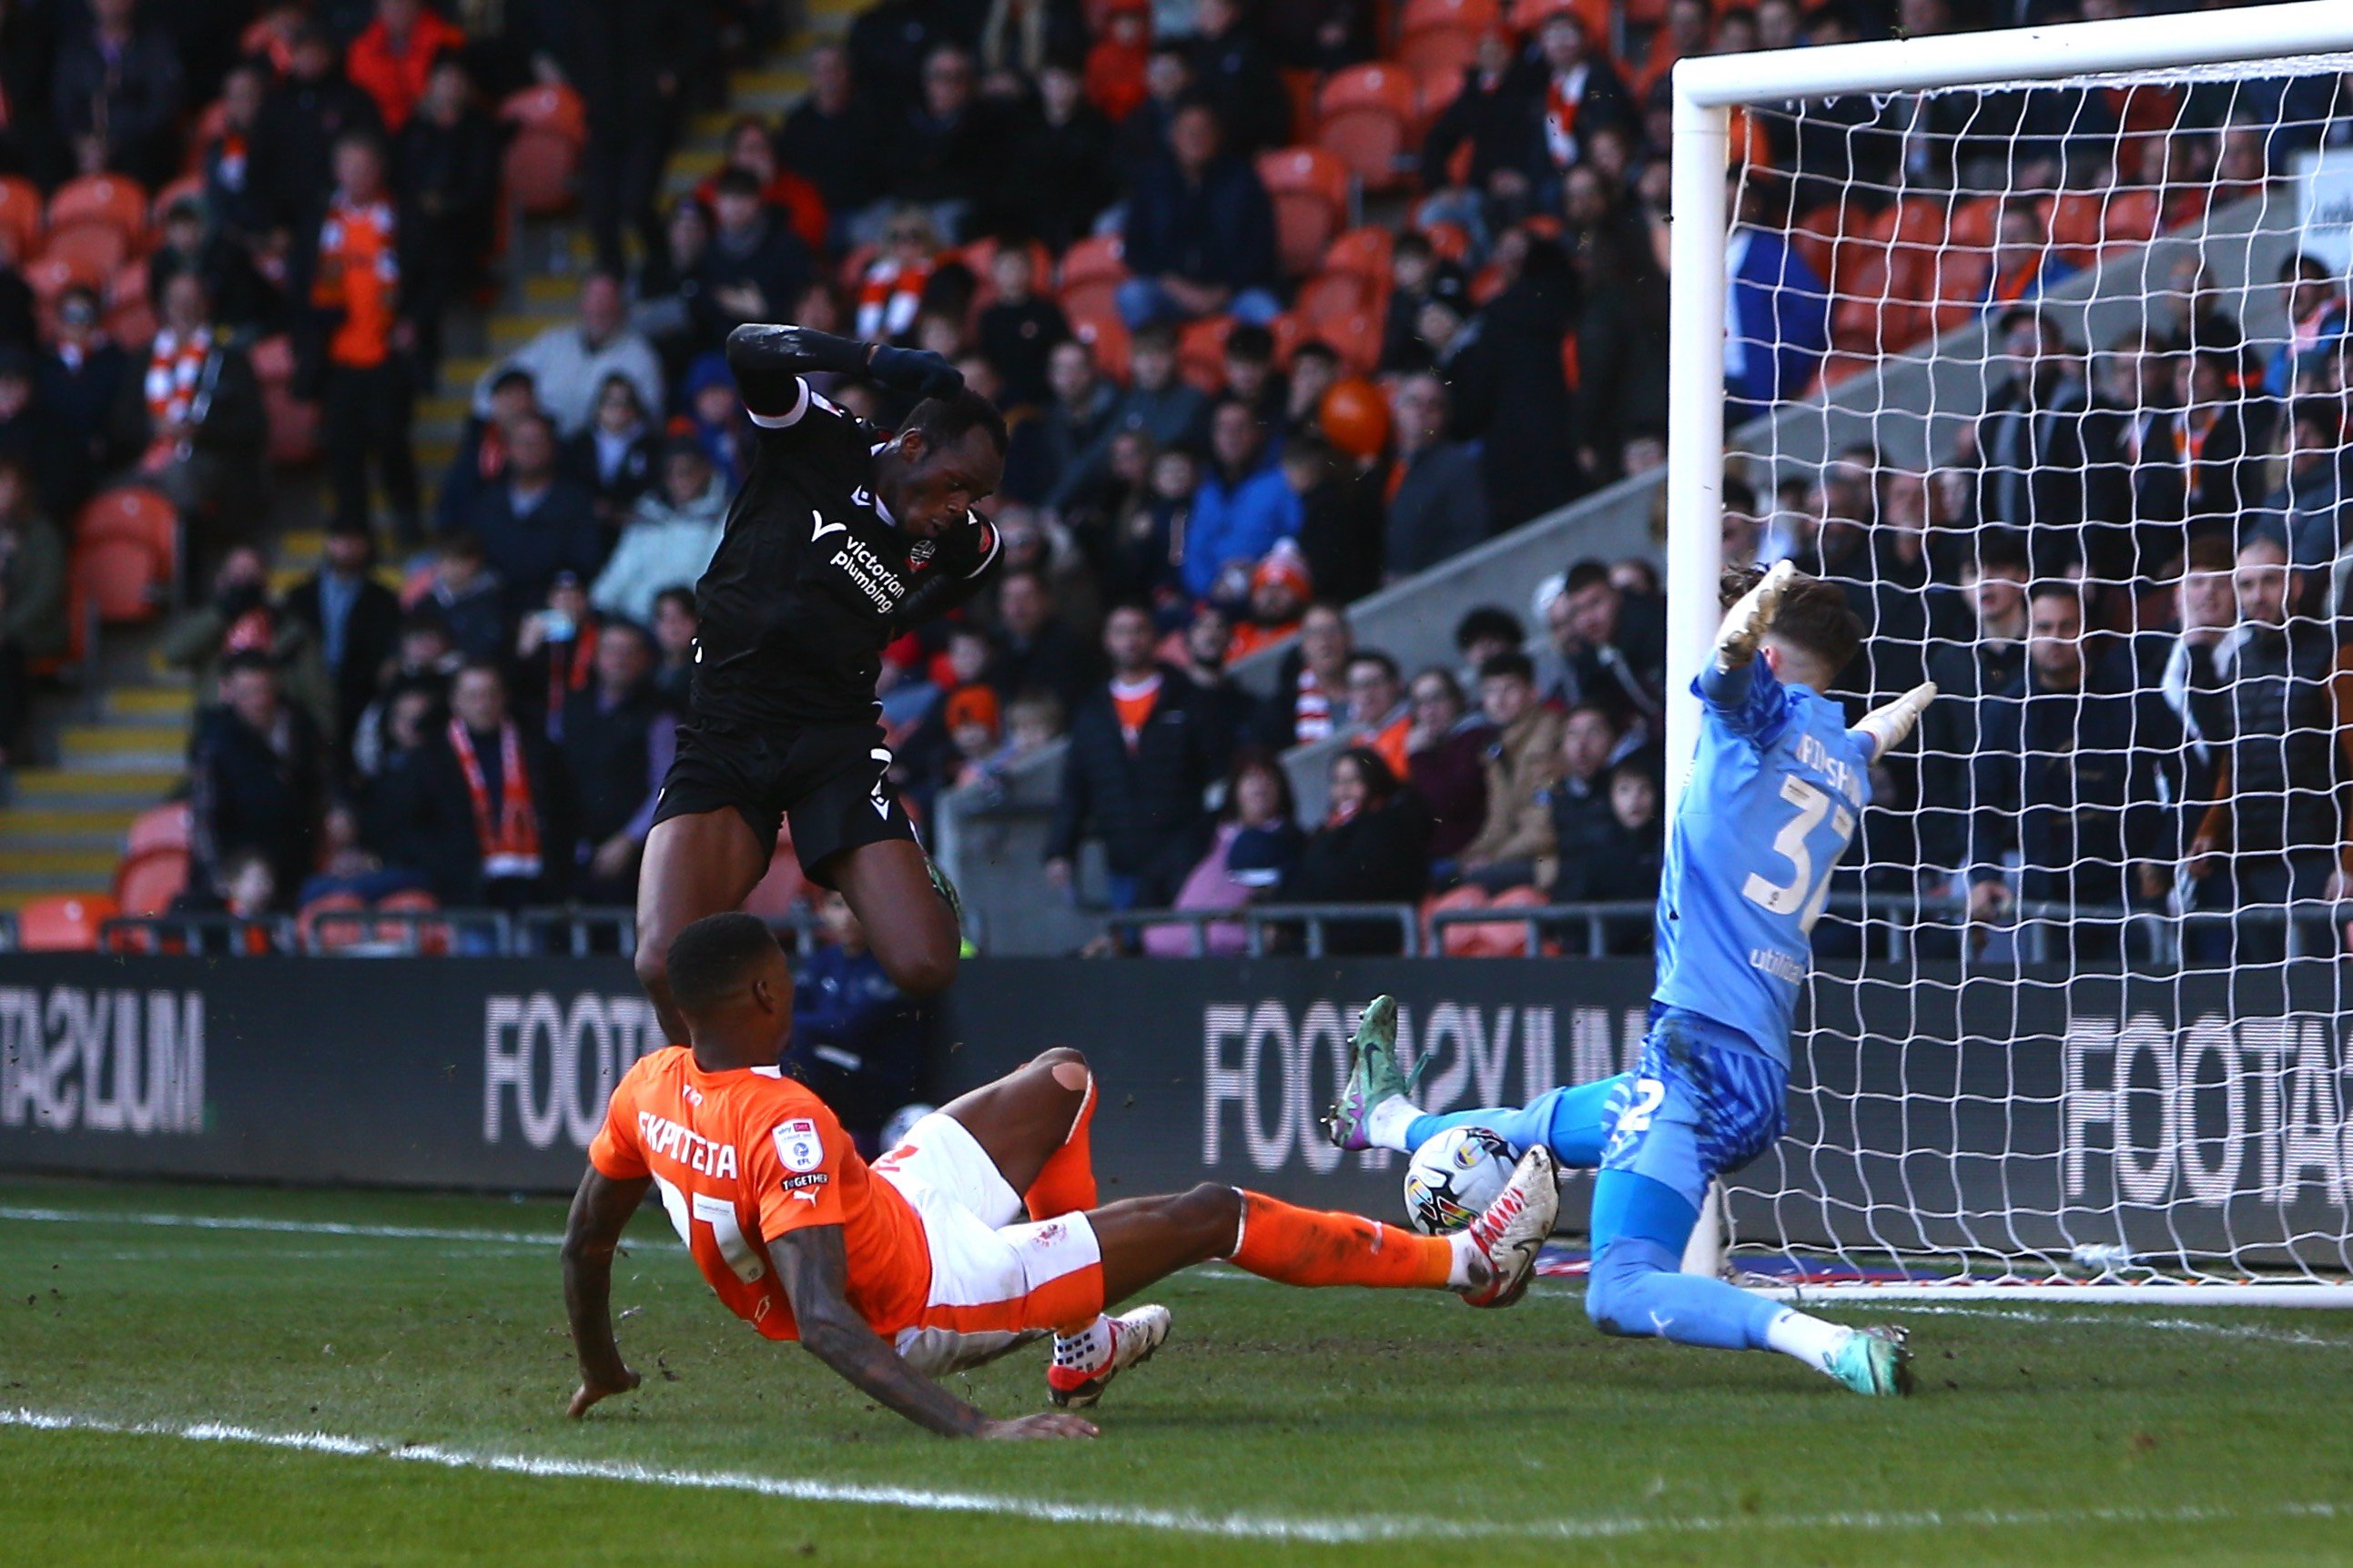 Mendes Gomes chance Blackpool